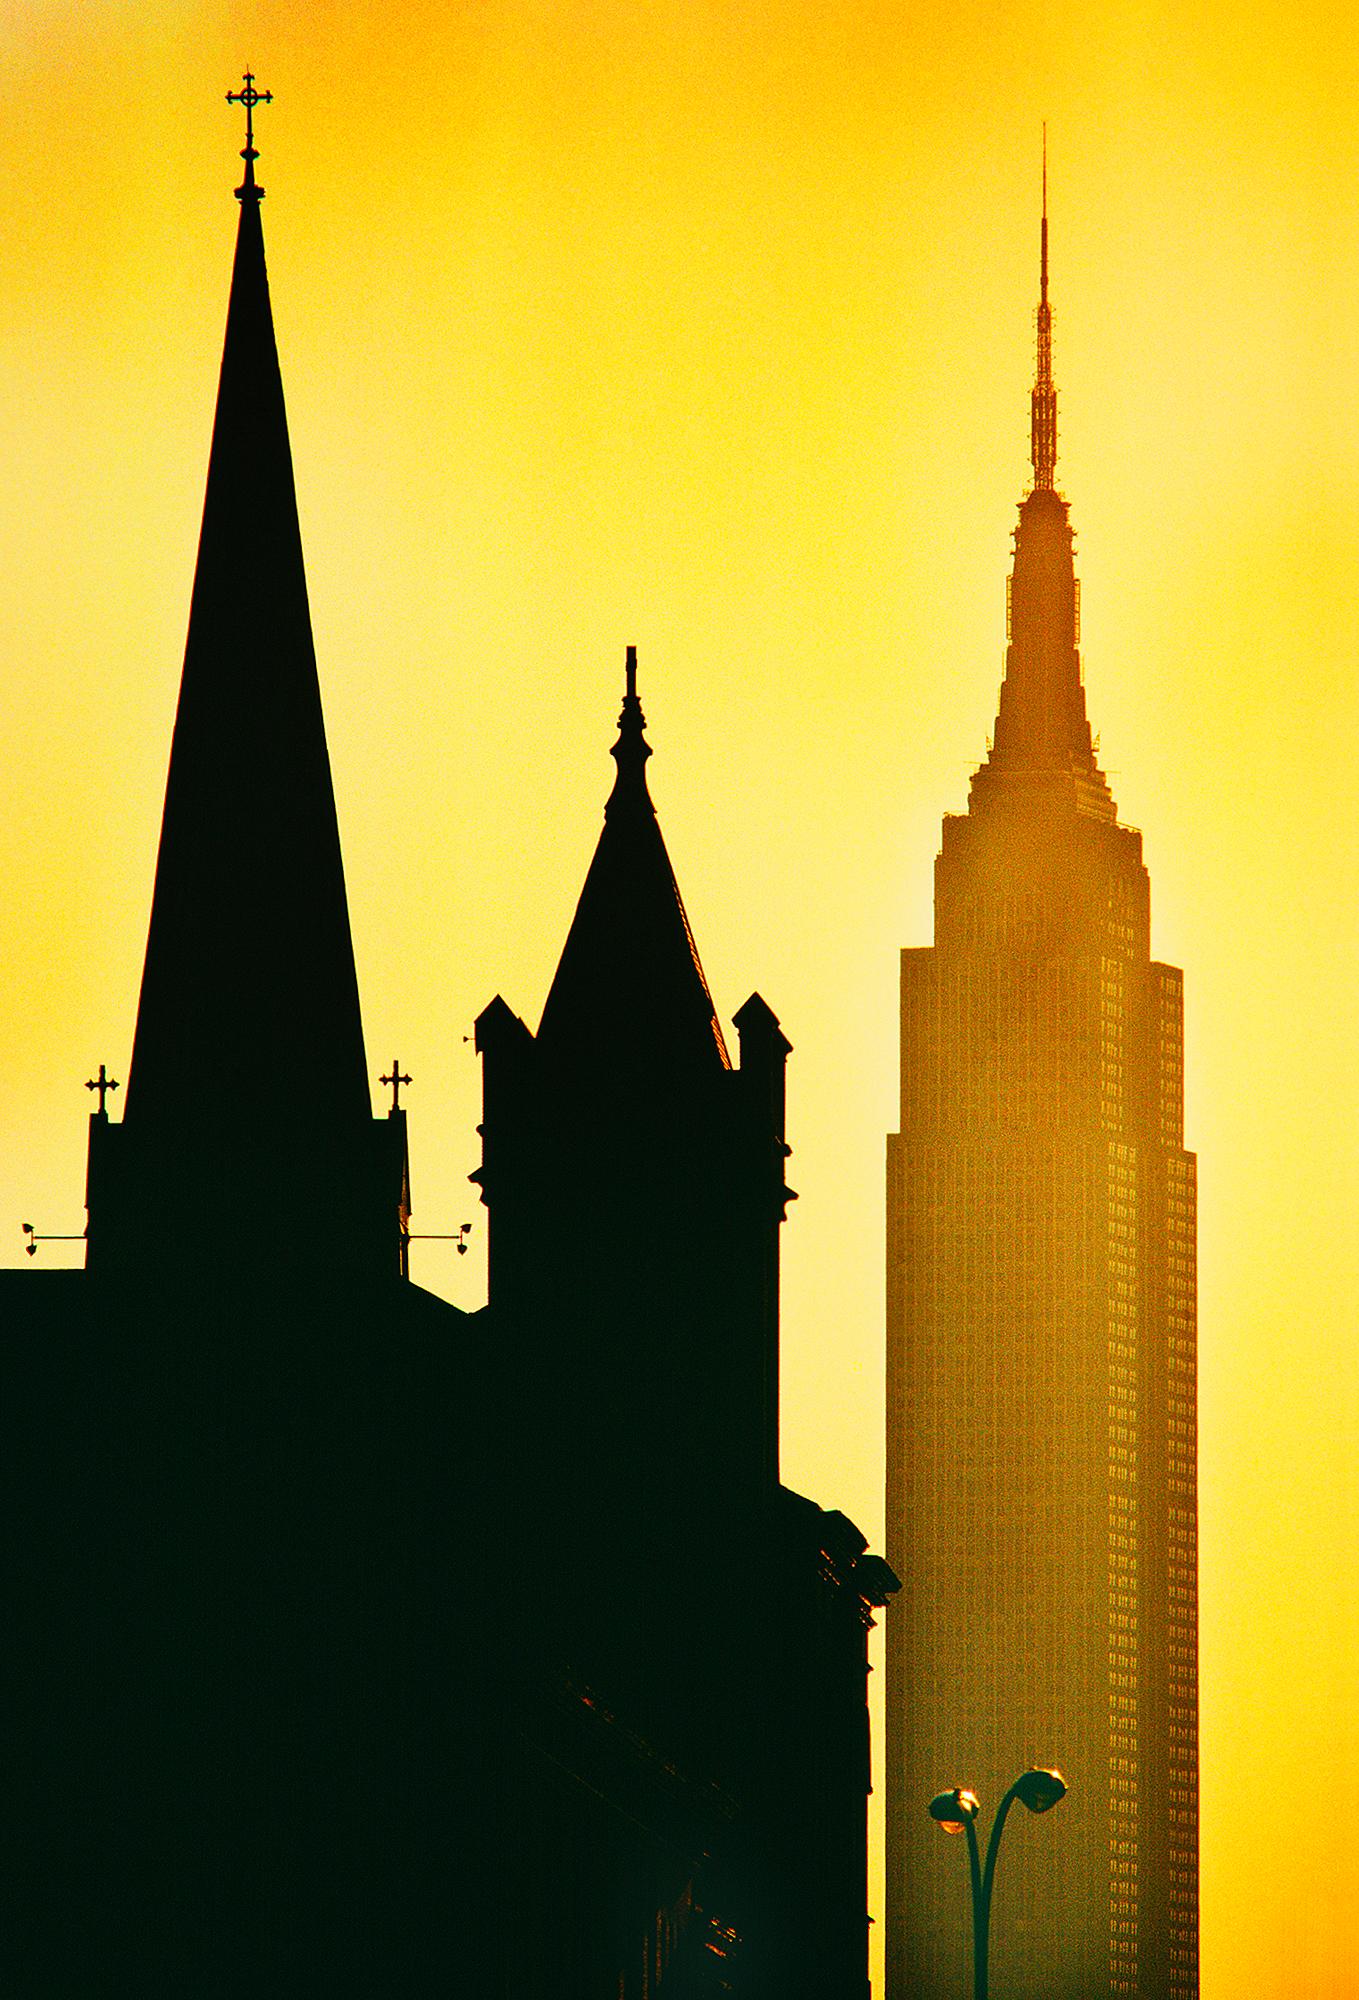 Inspiring Spires: Empire State Building in New York City at Gold Sunset